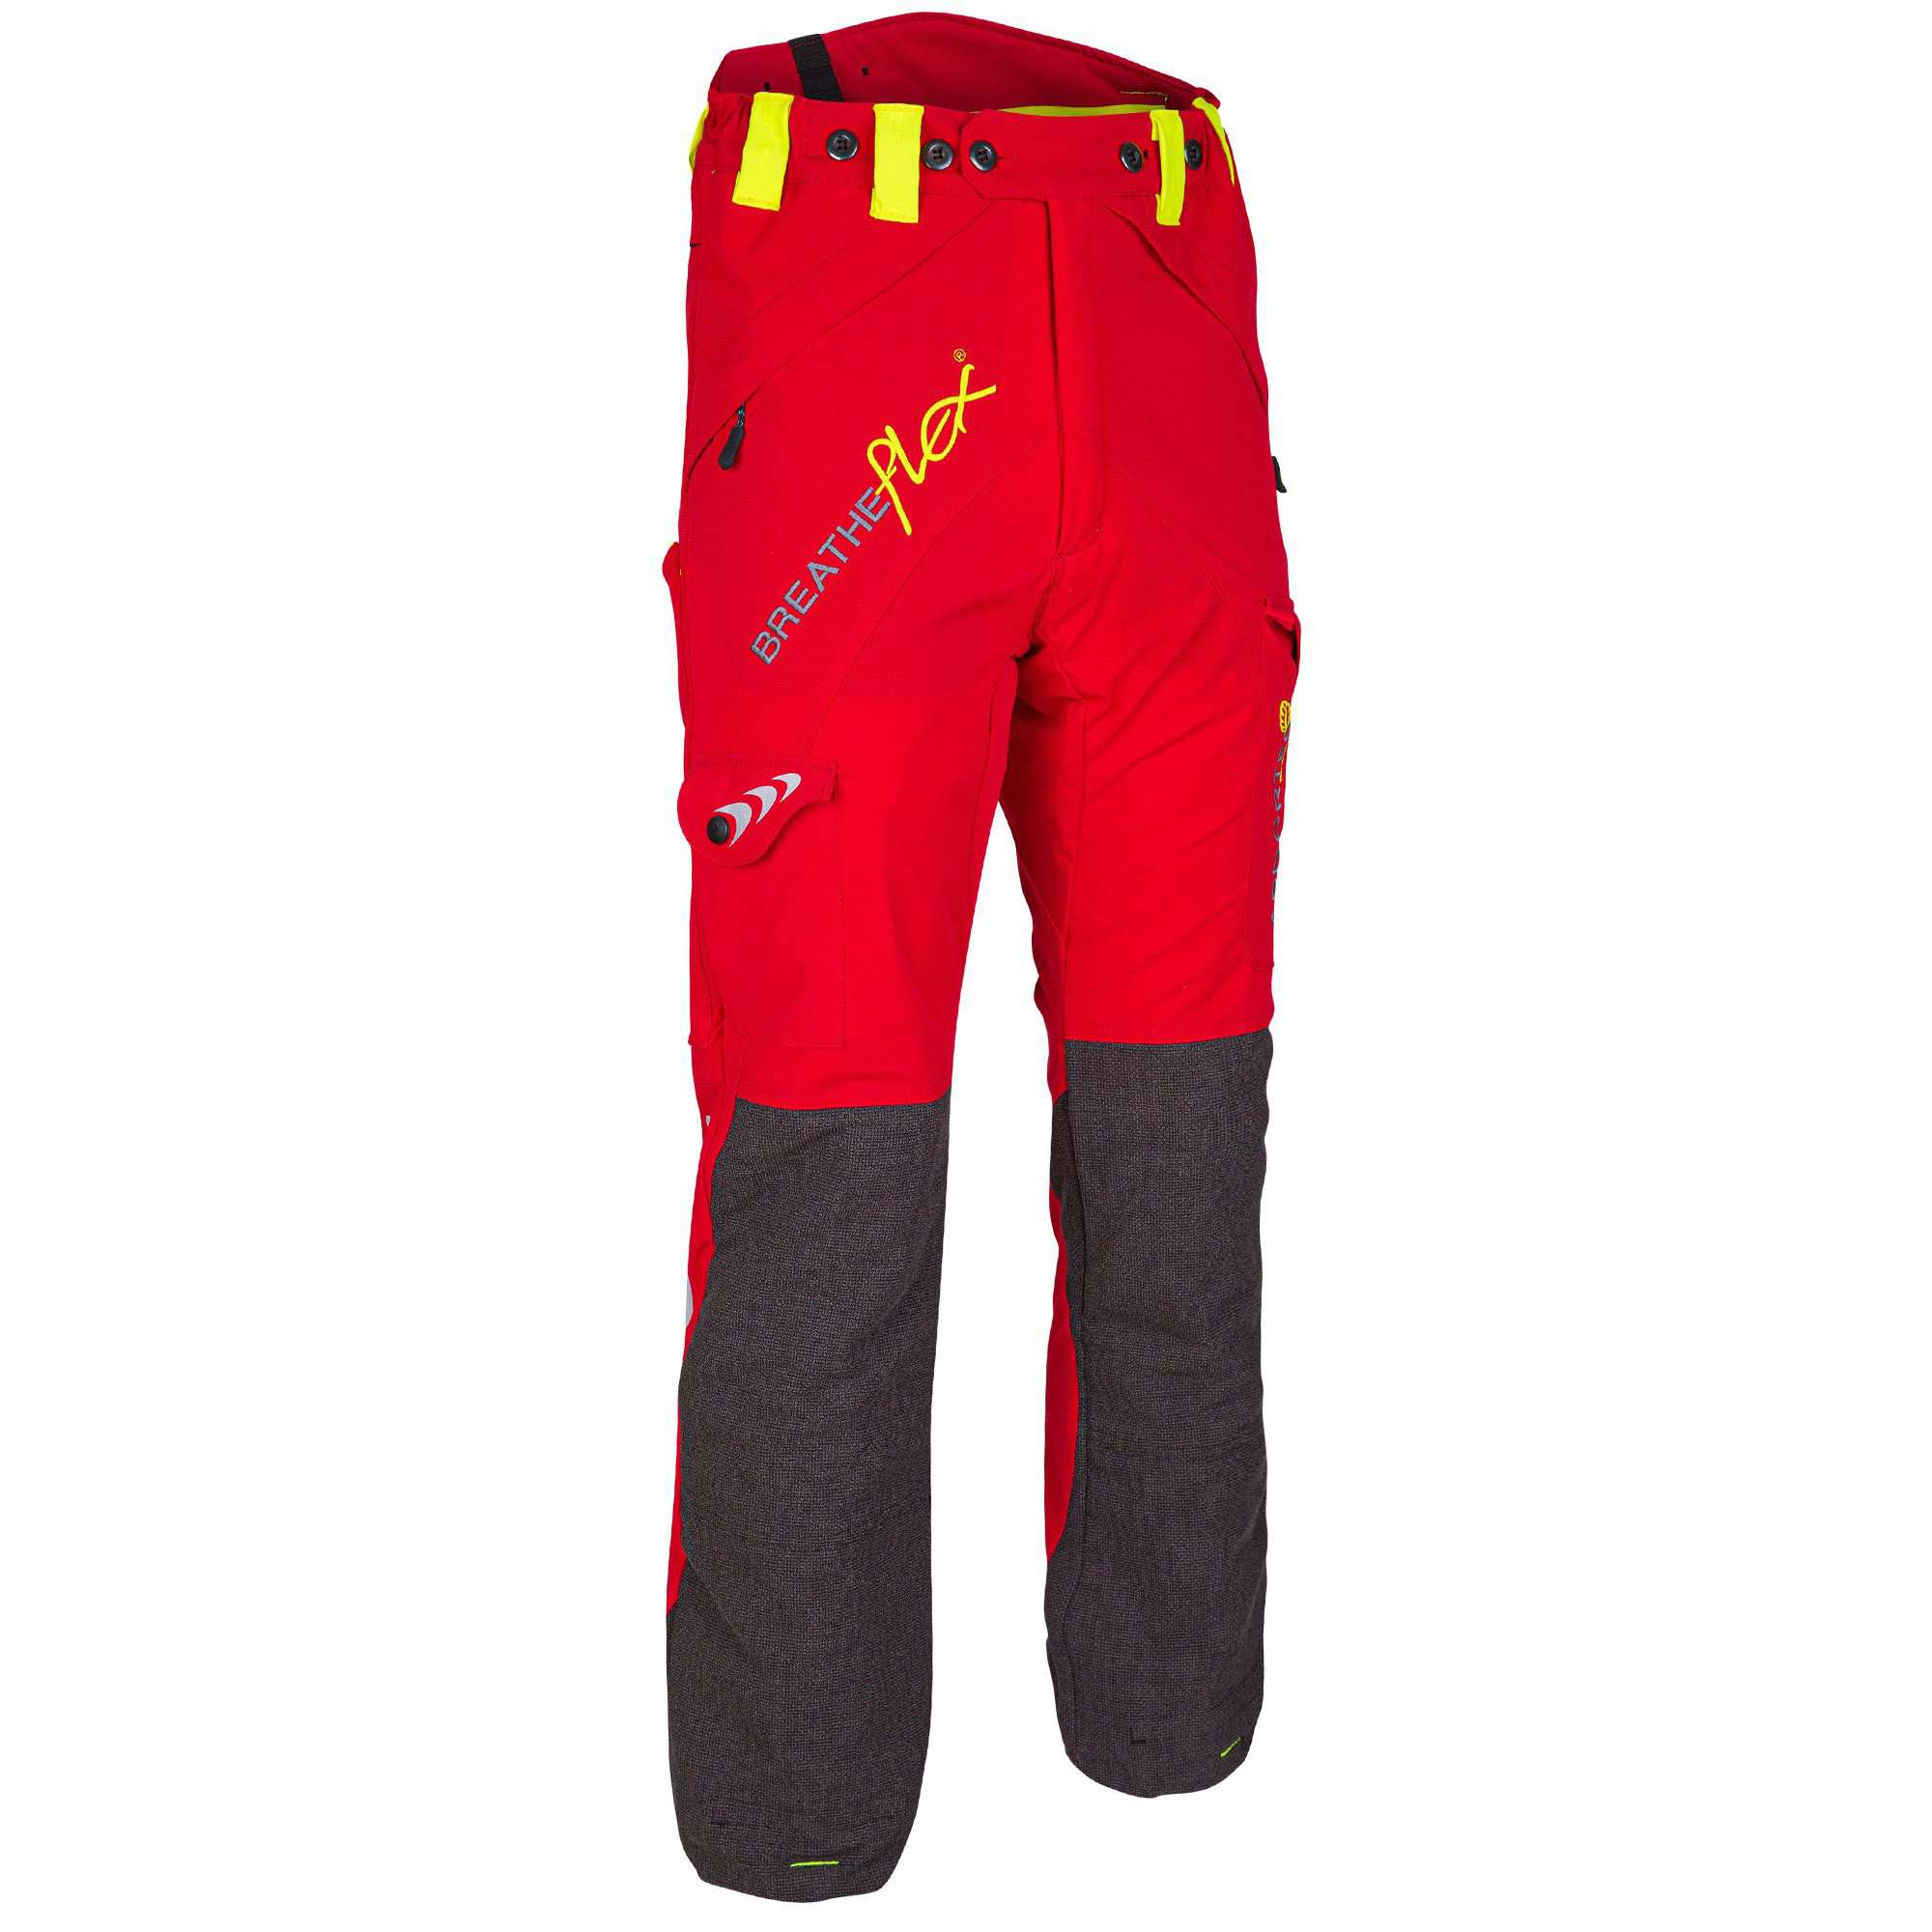 AT4050 Breatheflex Type C Class 1 Chainsaw Trousers - Red - Arbortec Forestwear